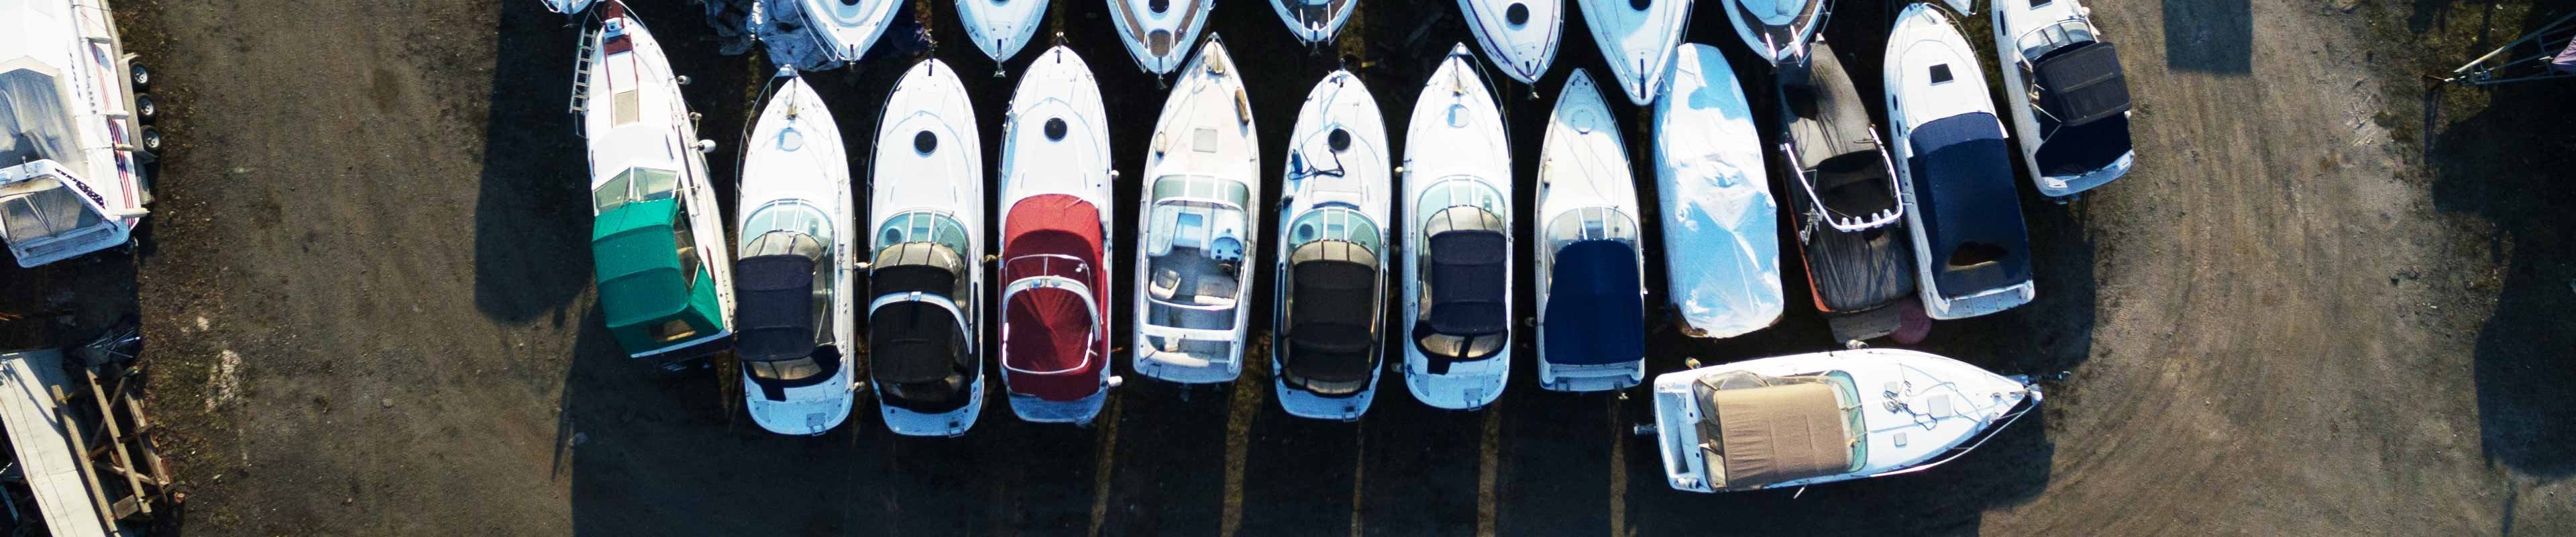 Boats in storage for the winter